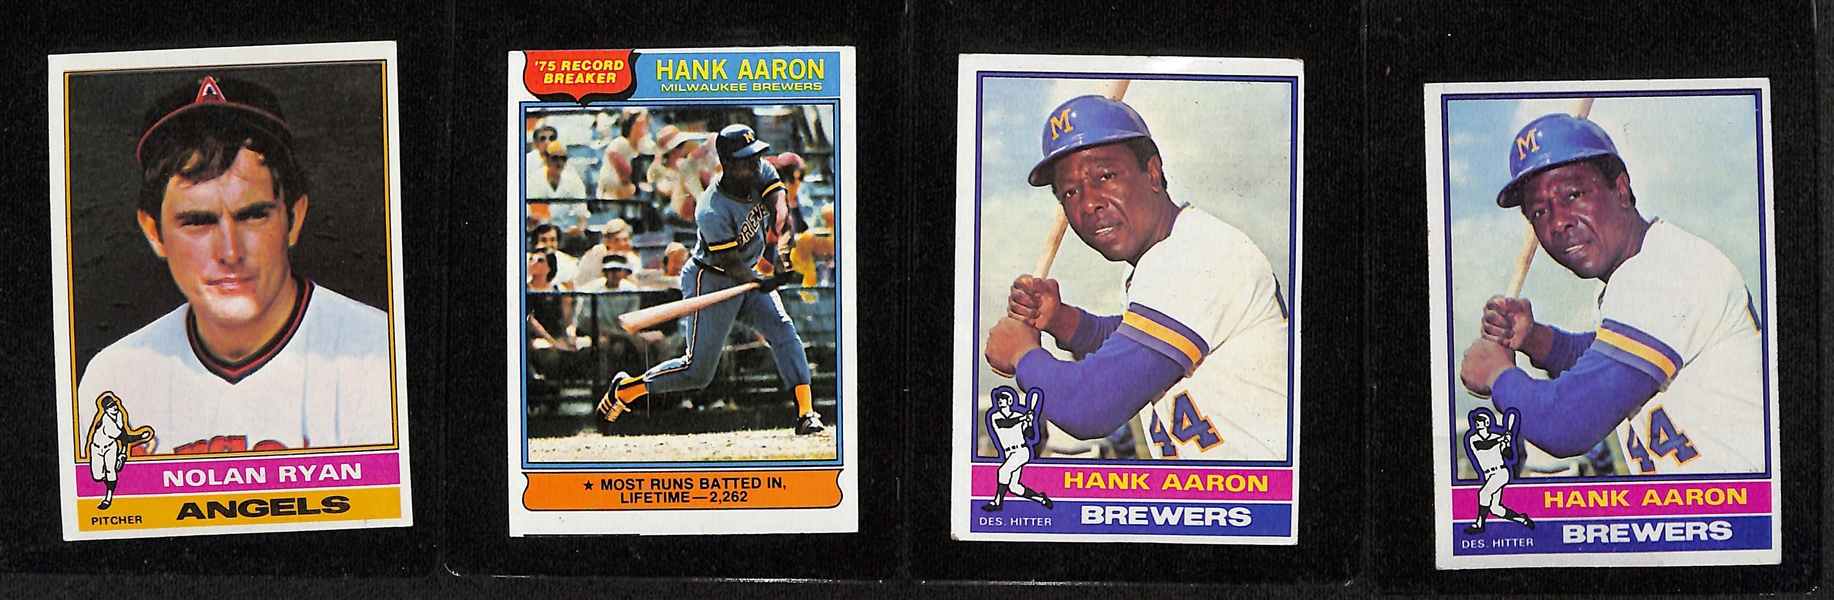 Lot of (2) 1976 Topps Baseball Partial Sets - Most Key Cards Included